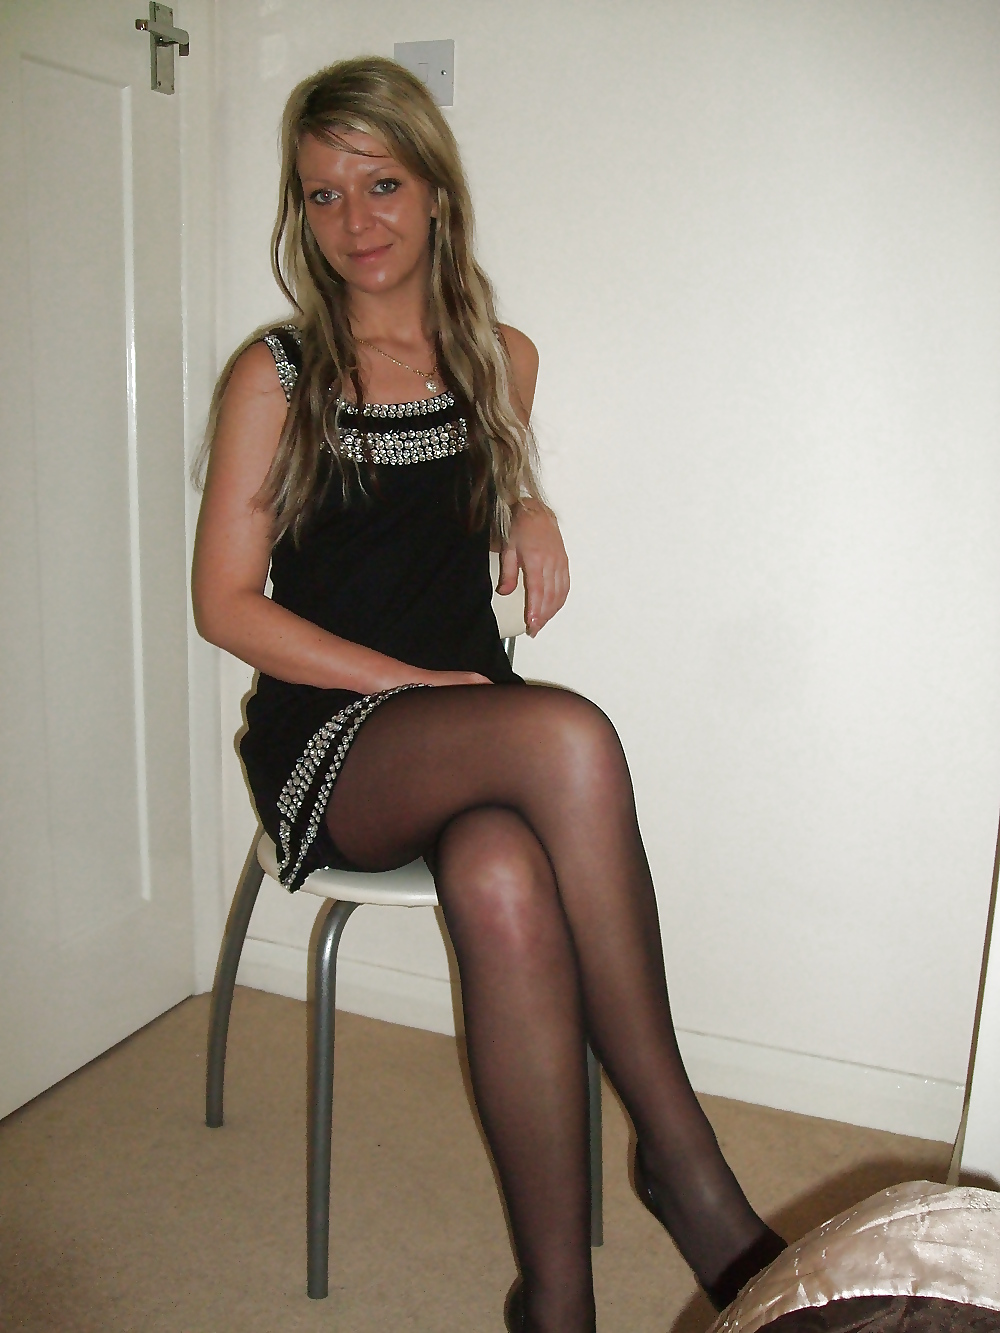 Miniskirts and crossed legs. Part 2 #13757232